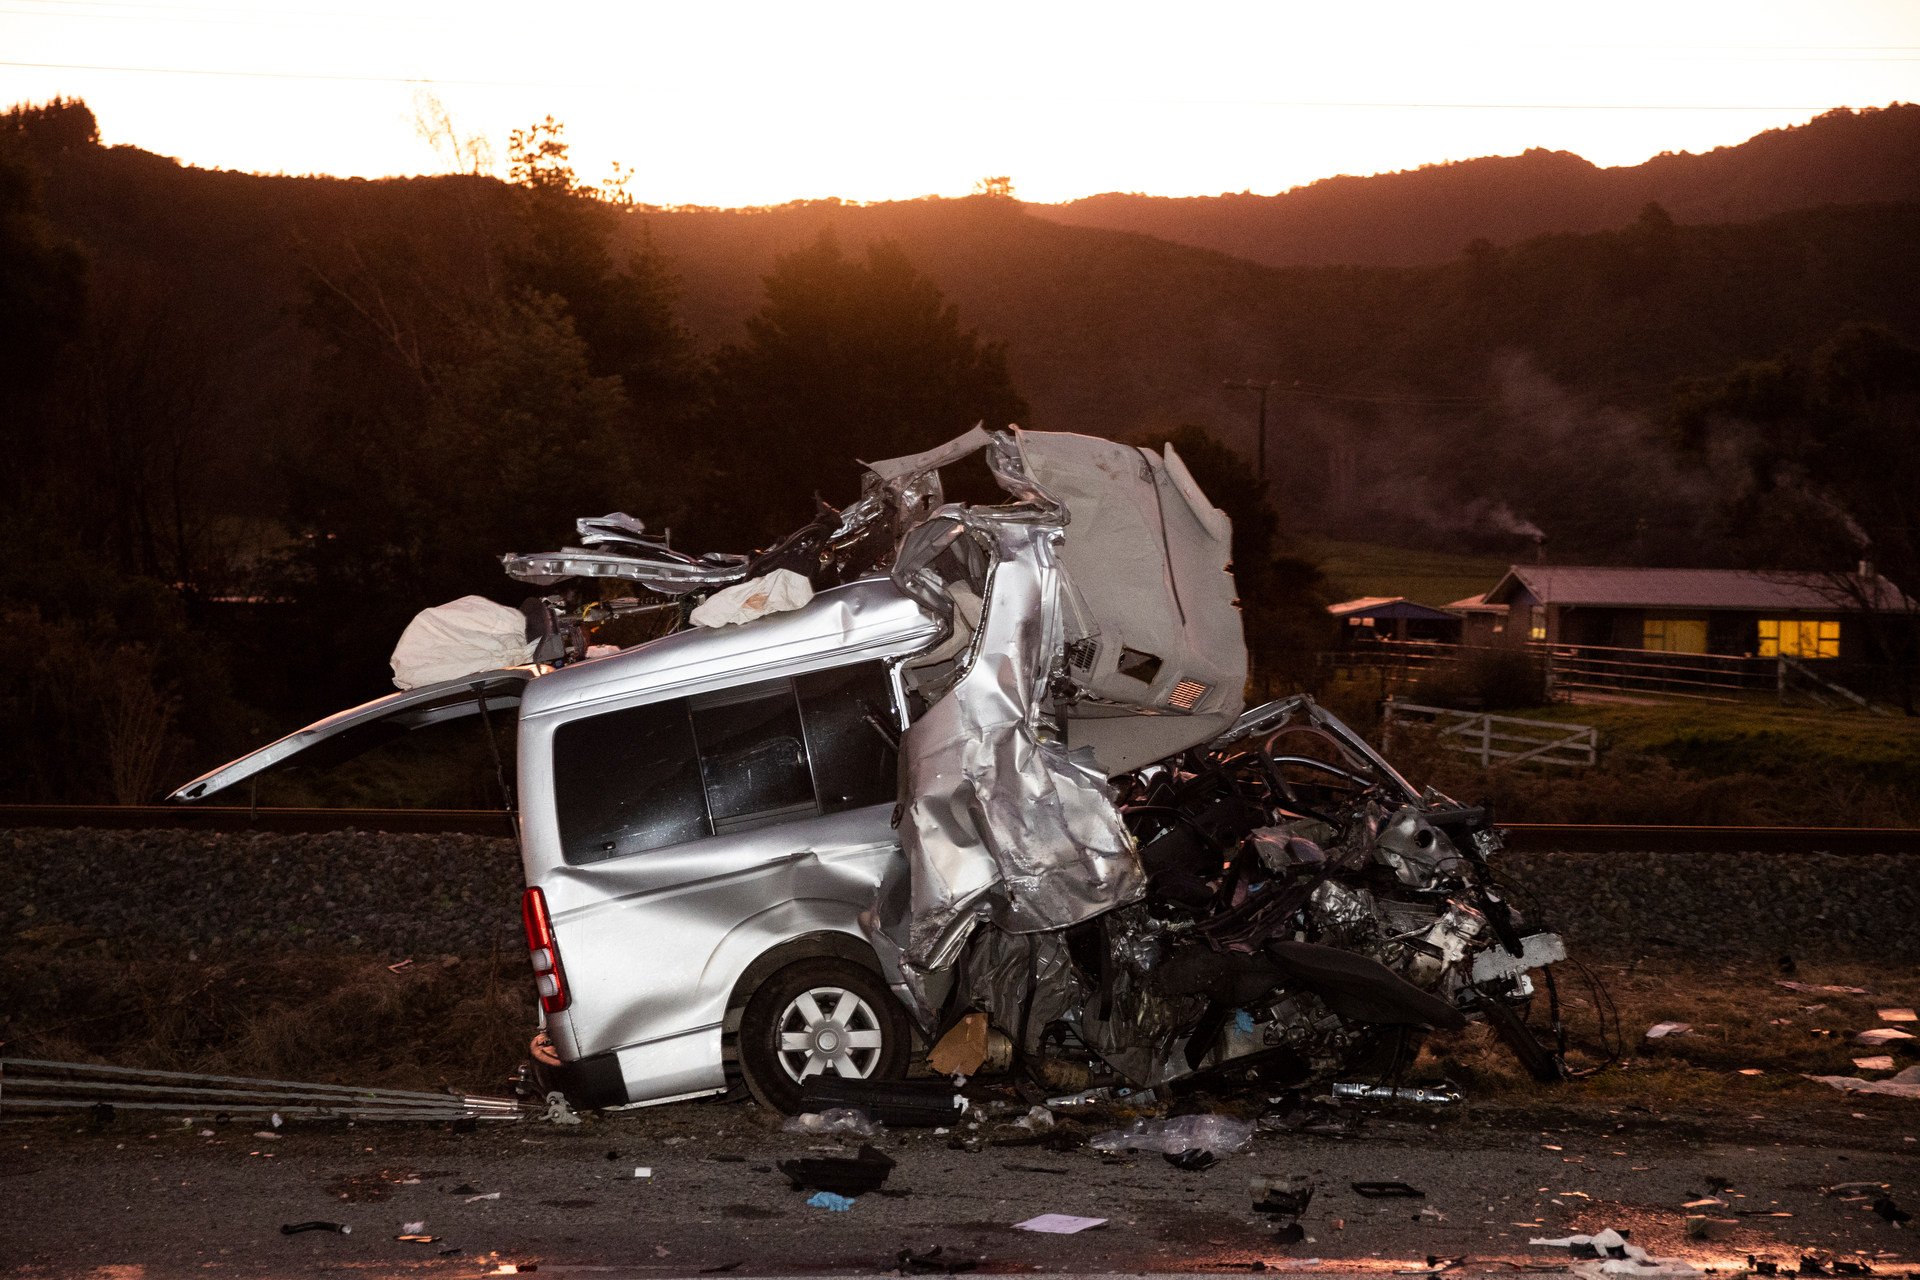 The family’s van was almost completely destroyed in the crash. Photo: New Zealand Herald